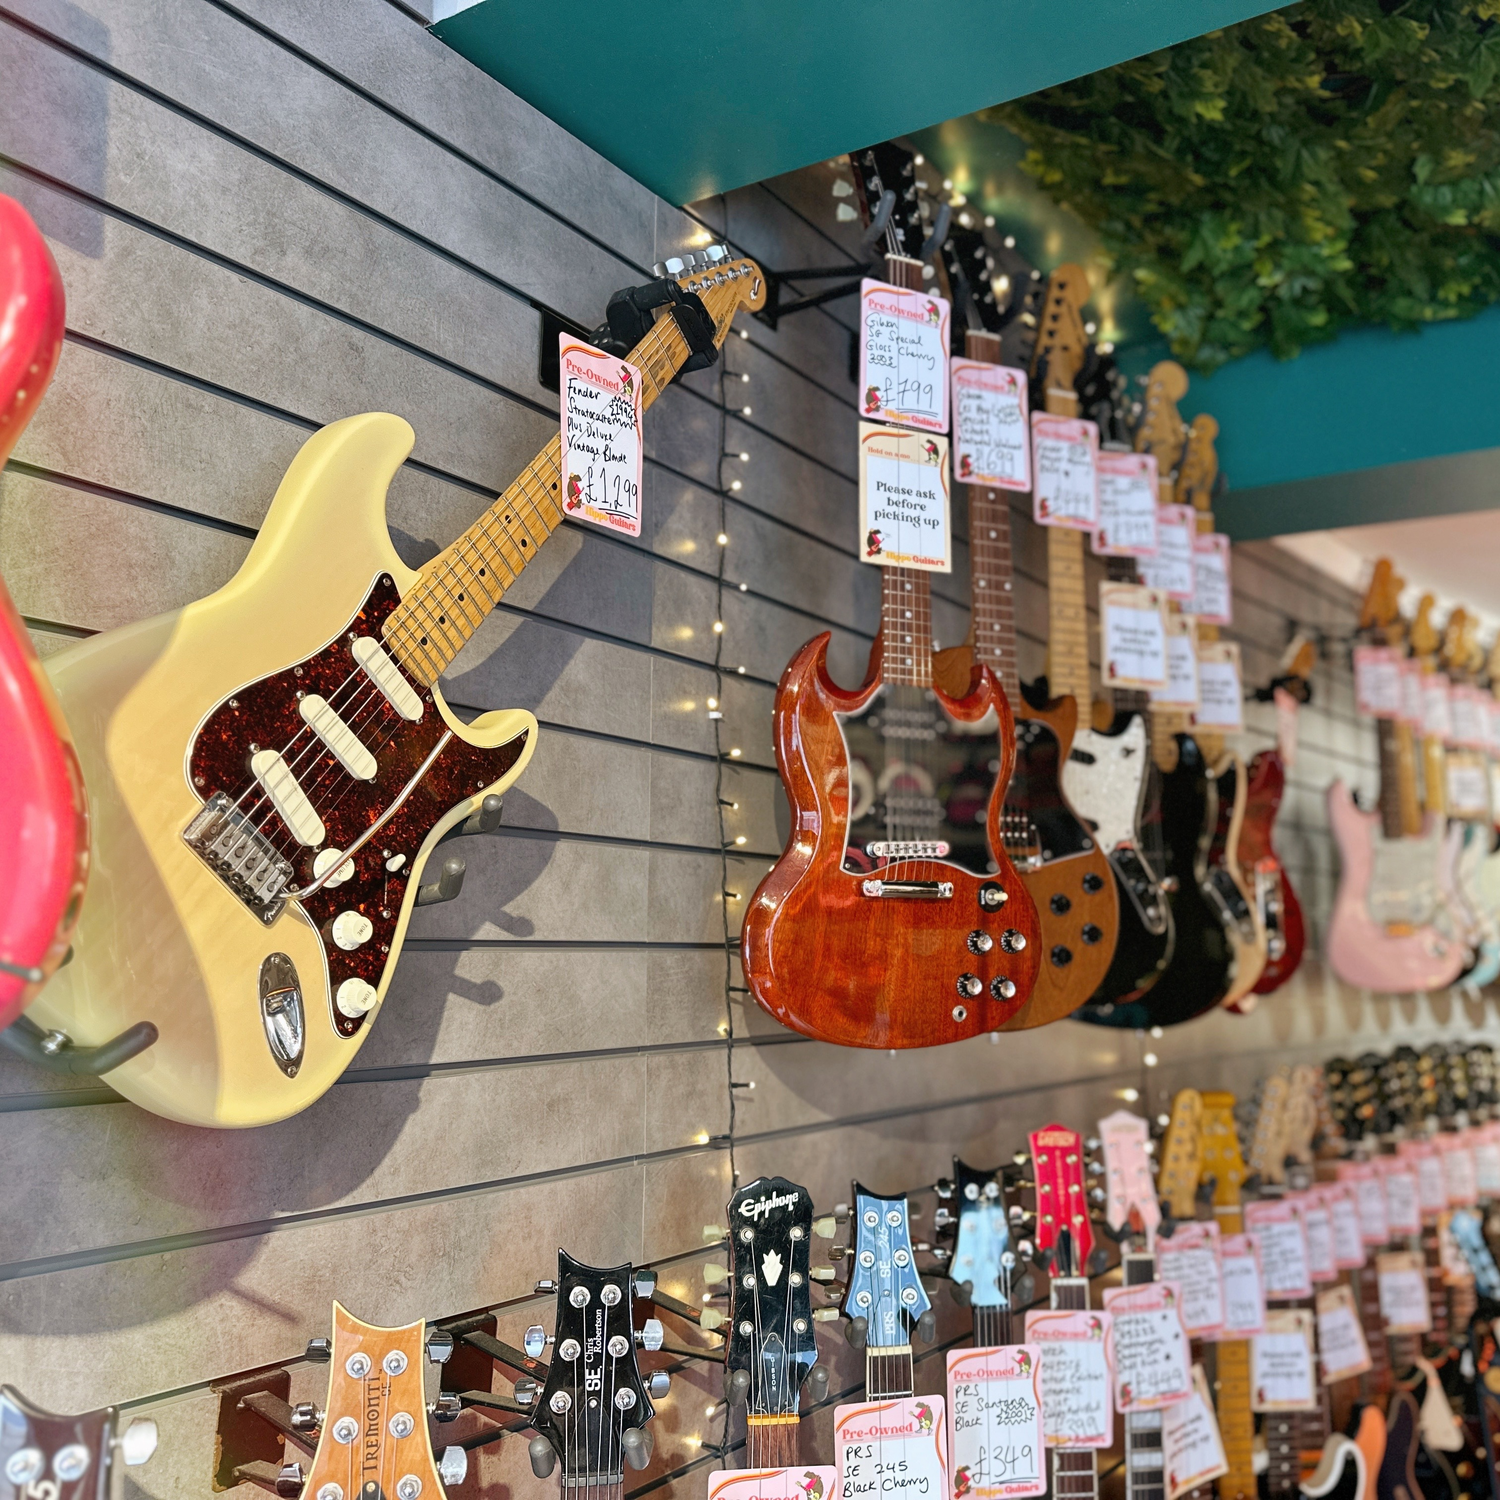 Pre-Owned Electric Guitars